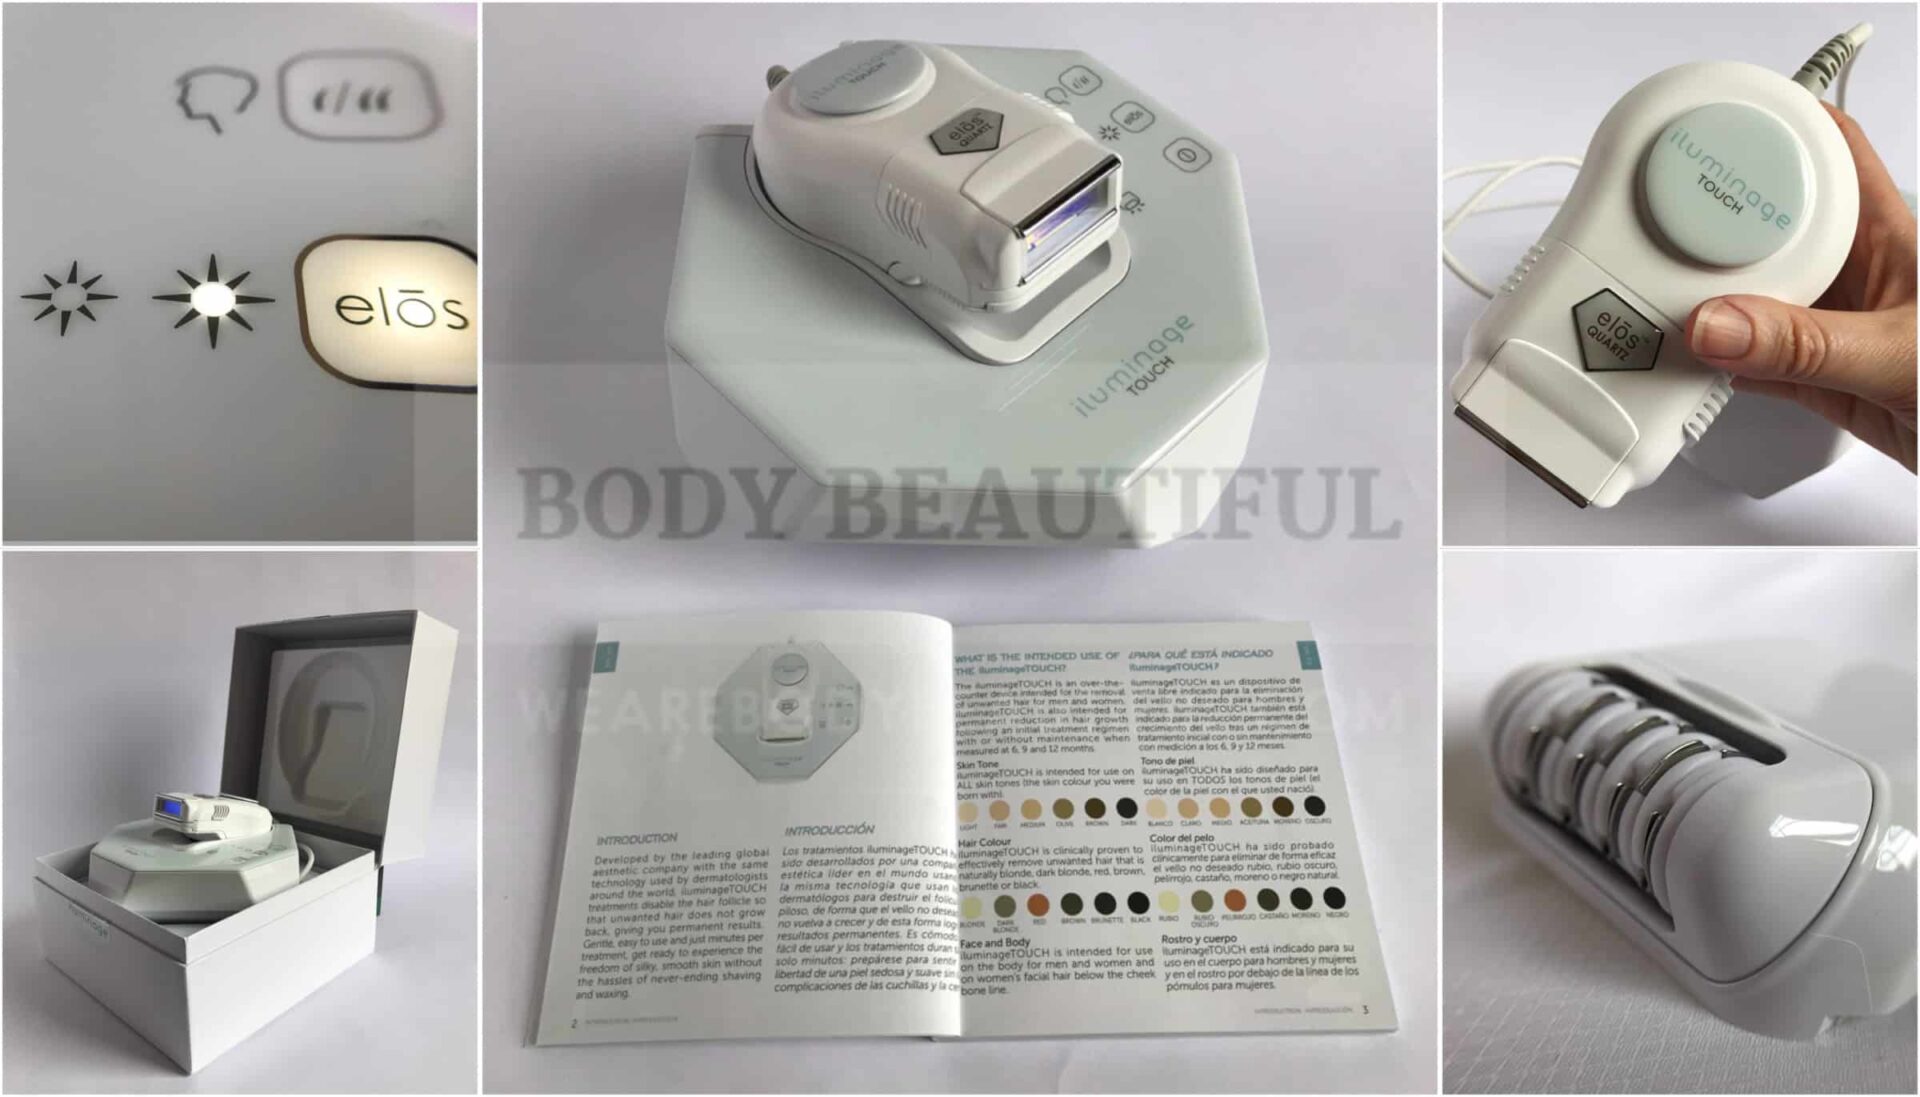 Iluminage Touch IPL & RF hair removal device reviewed by WeAreBodyBeautiful.com